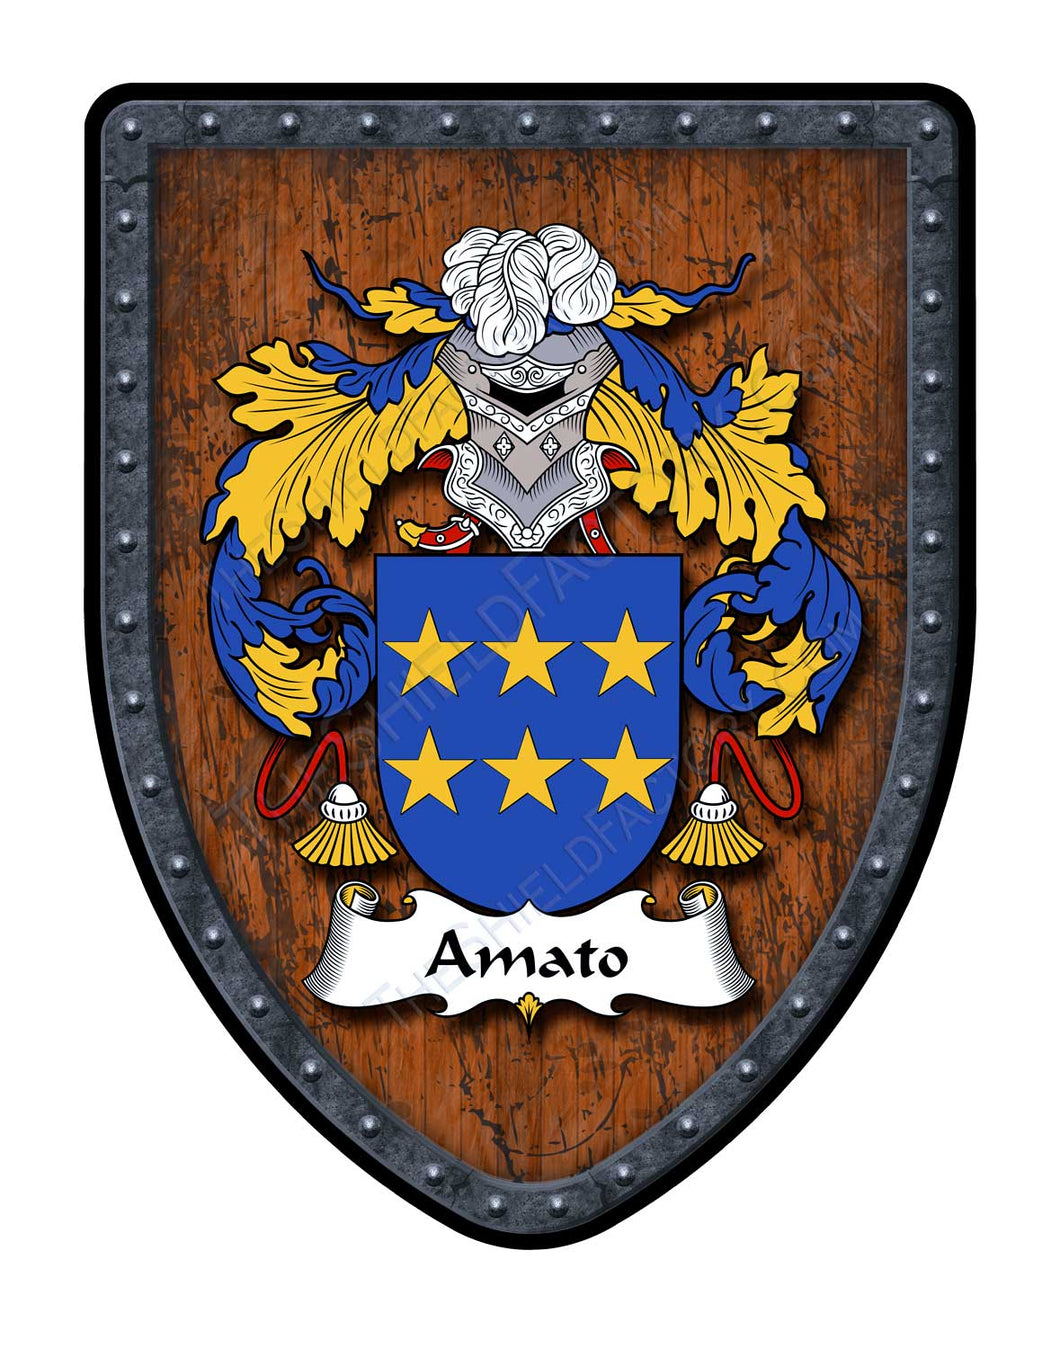 Amato Family Coat of Arms Family Crest